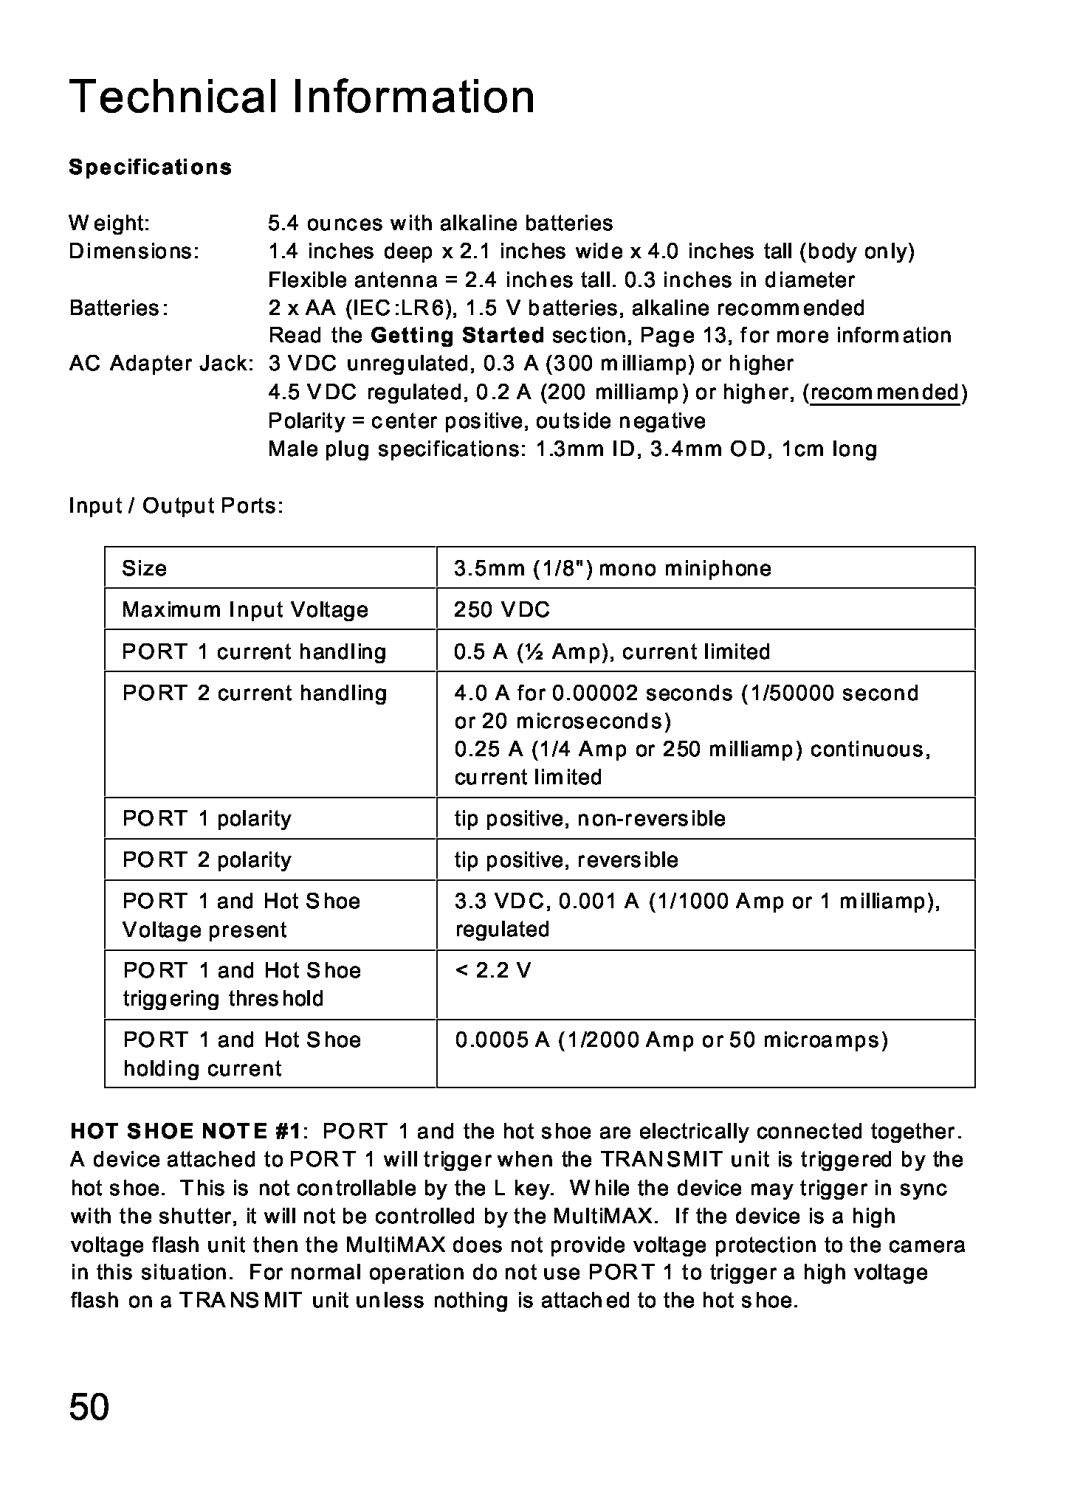 MaxTech Transceiver manual Technical Information, Specifications 